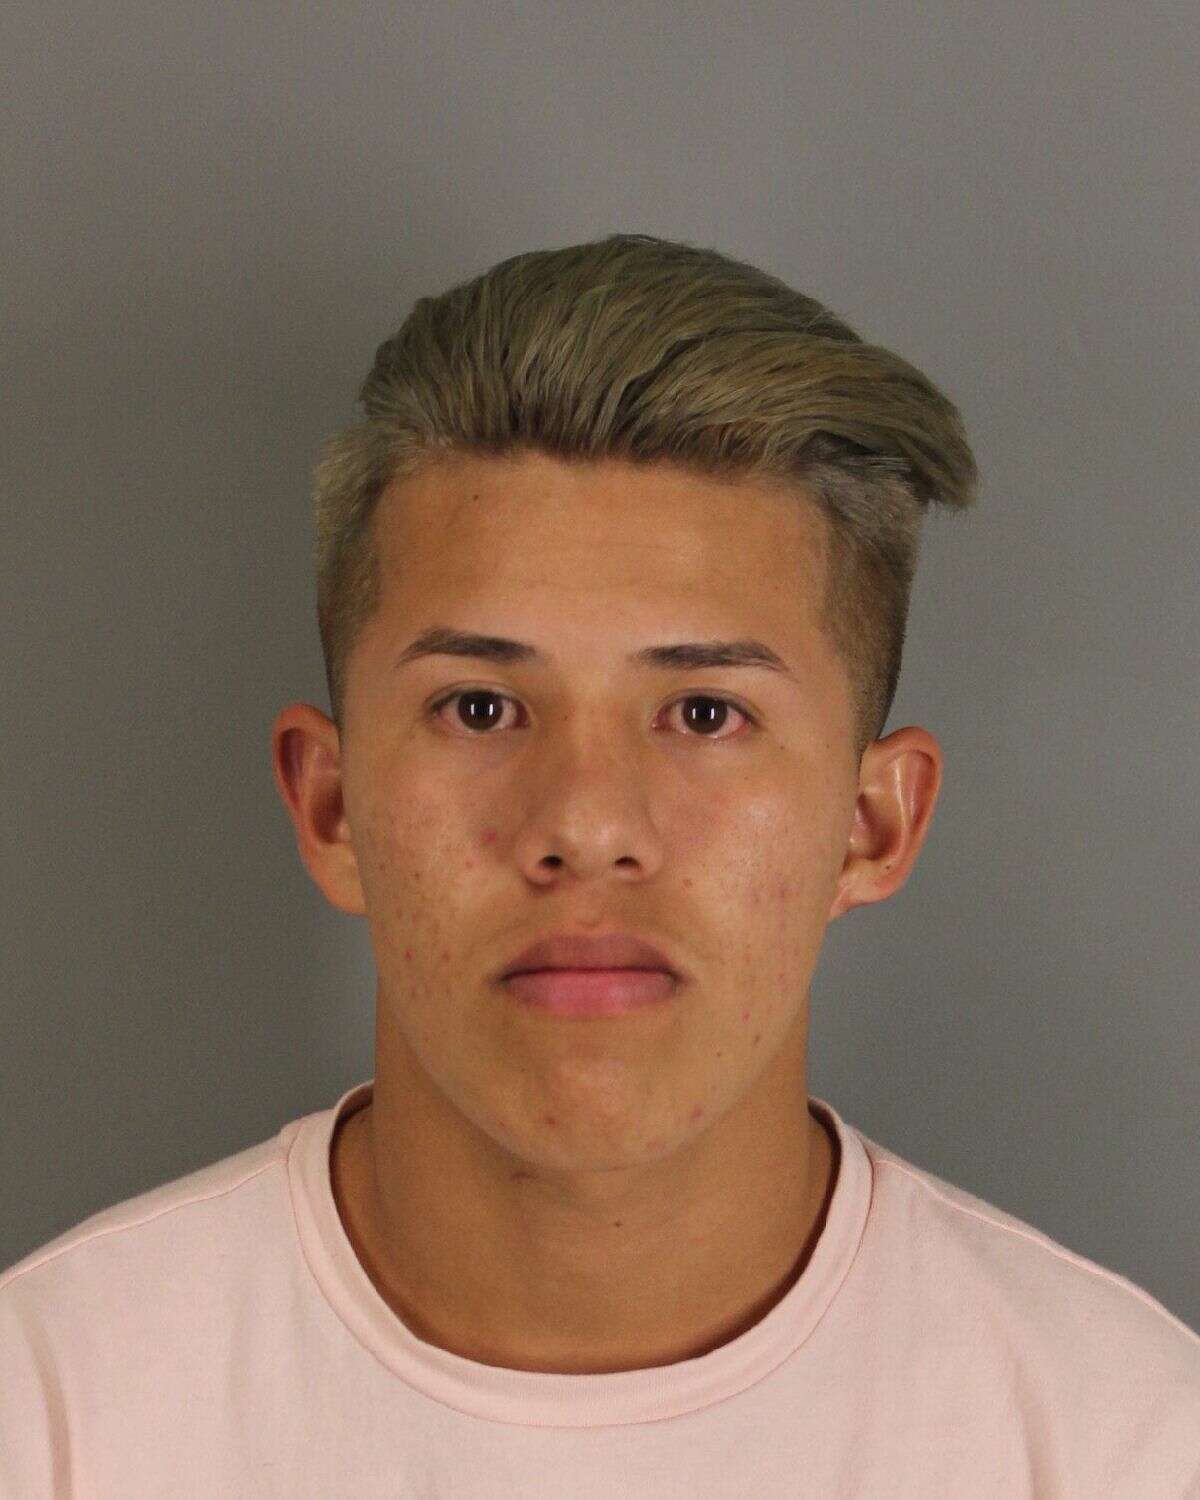 Erik Pagoada-Bustillo, 17, was booked into the Jefferson County Correctional Facility on Friday for burglary of a habitation. 